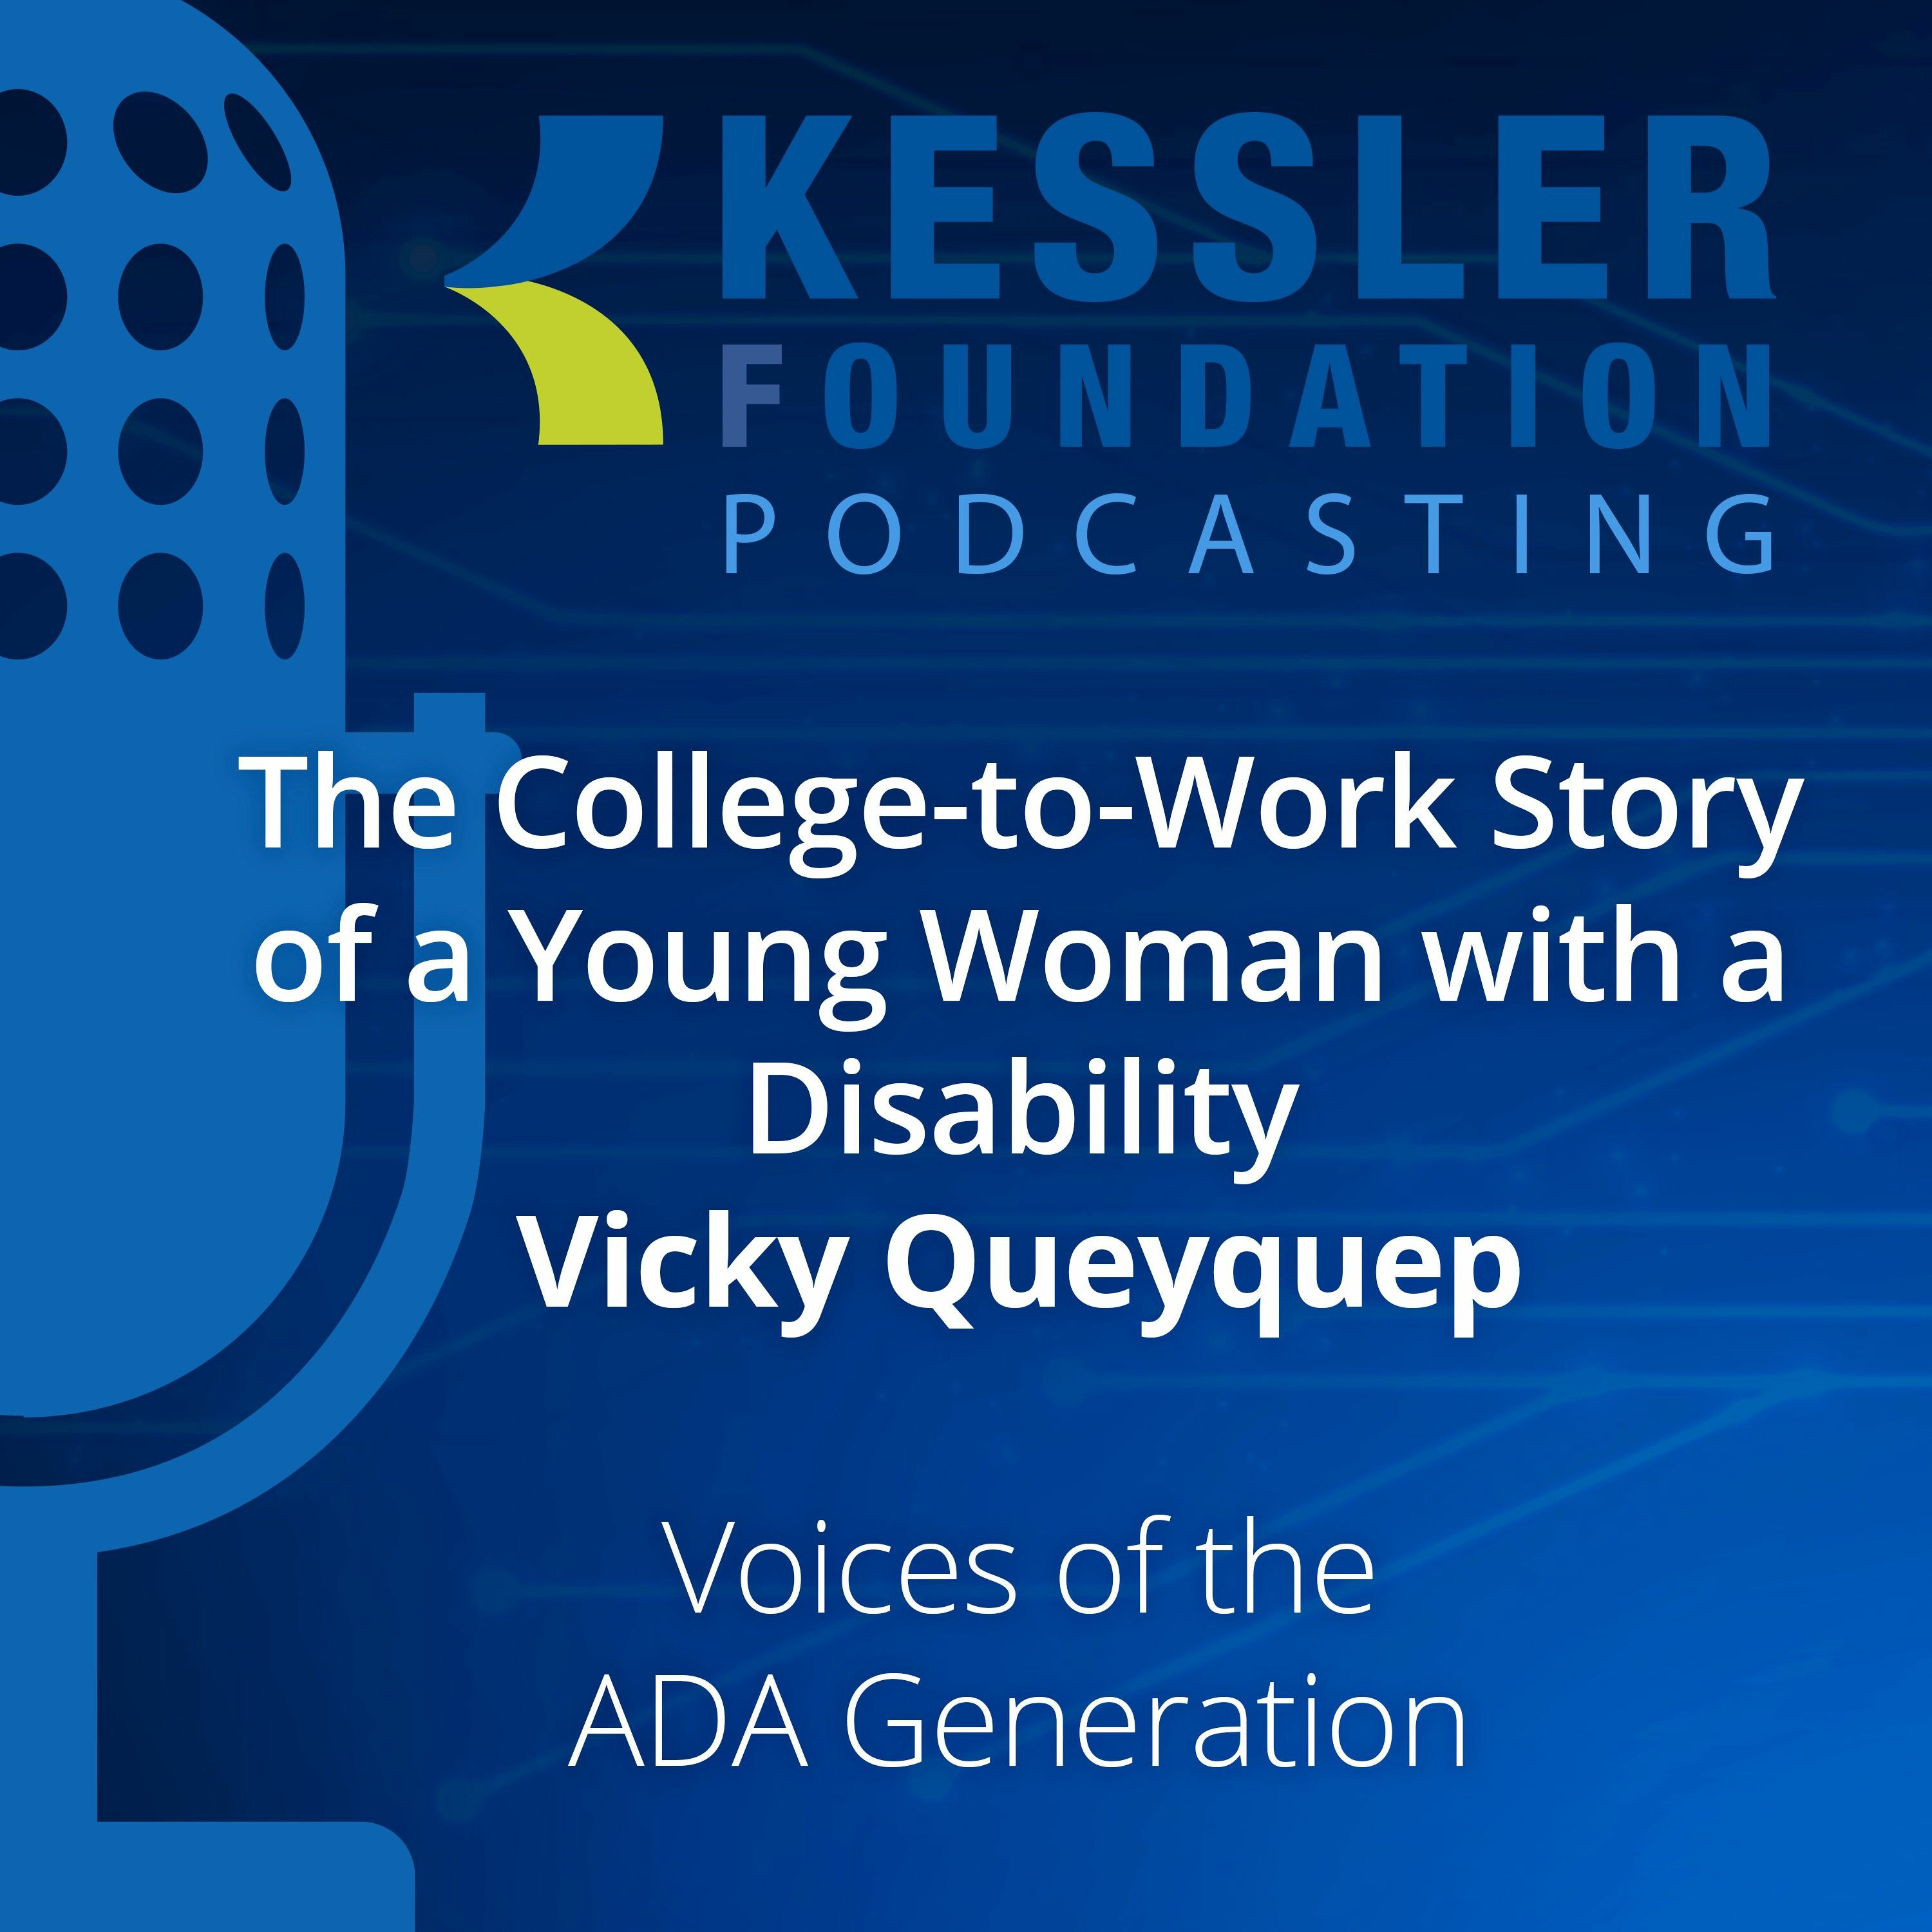 The College-to-Work Story of a Young Woman with a Disability – Vicky Queyquep